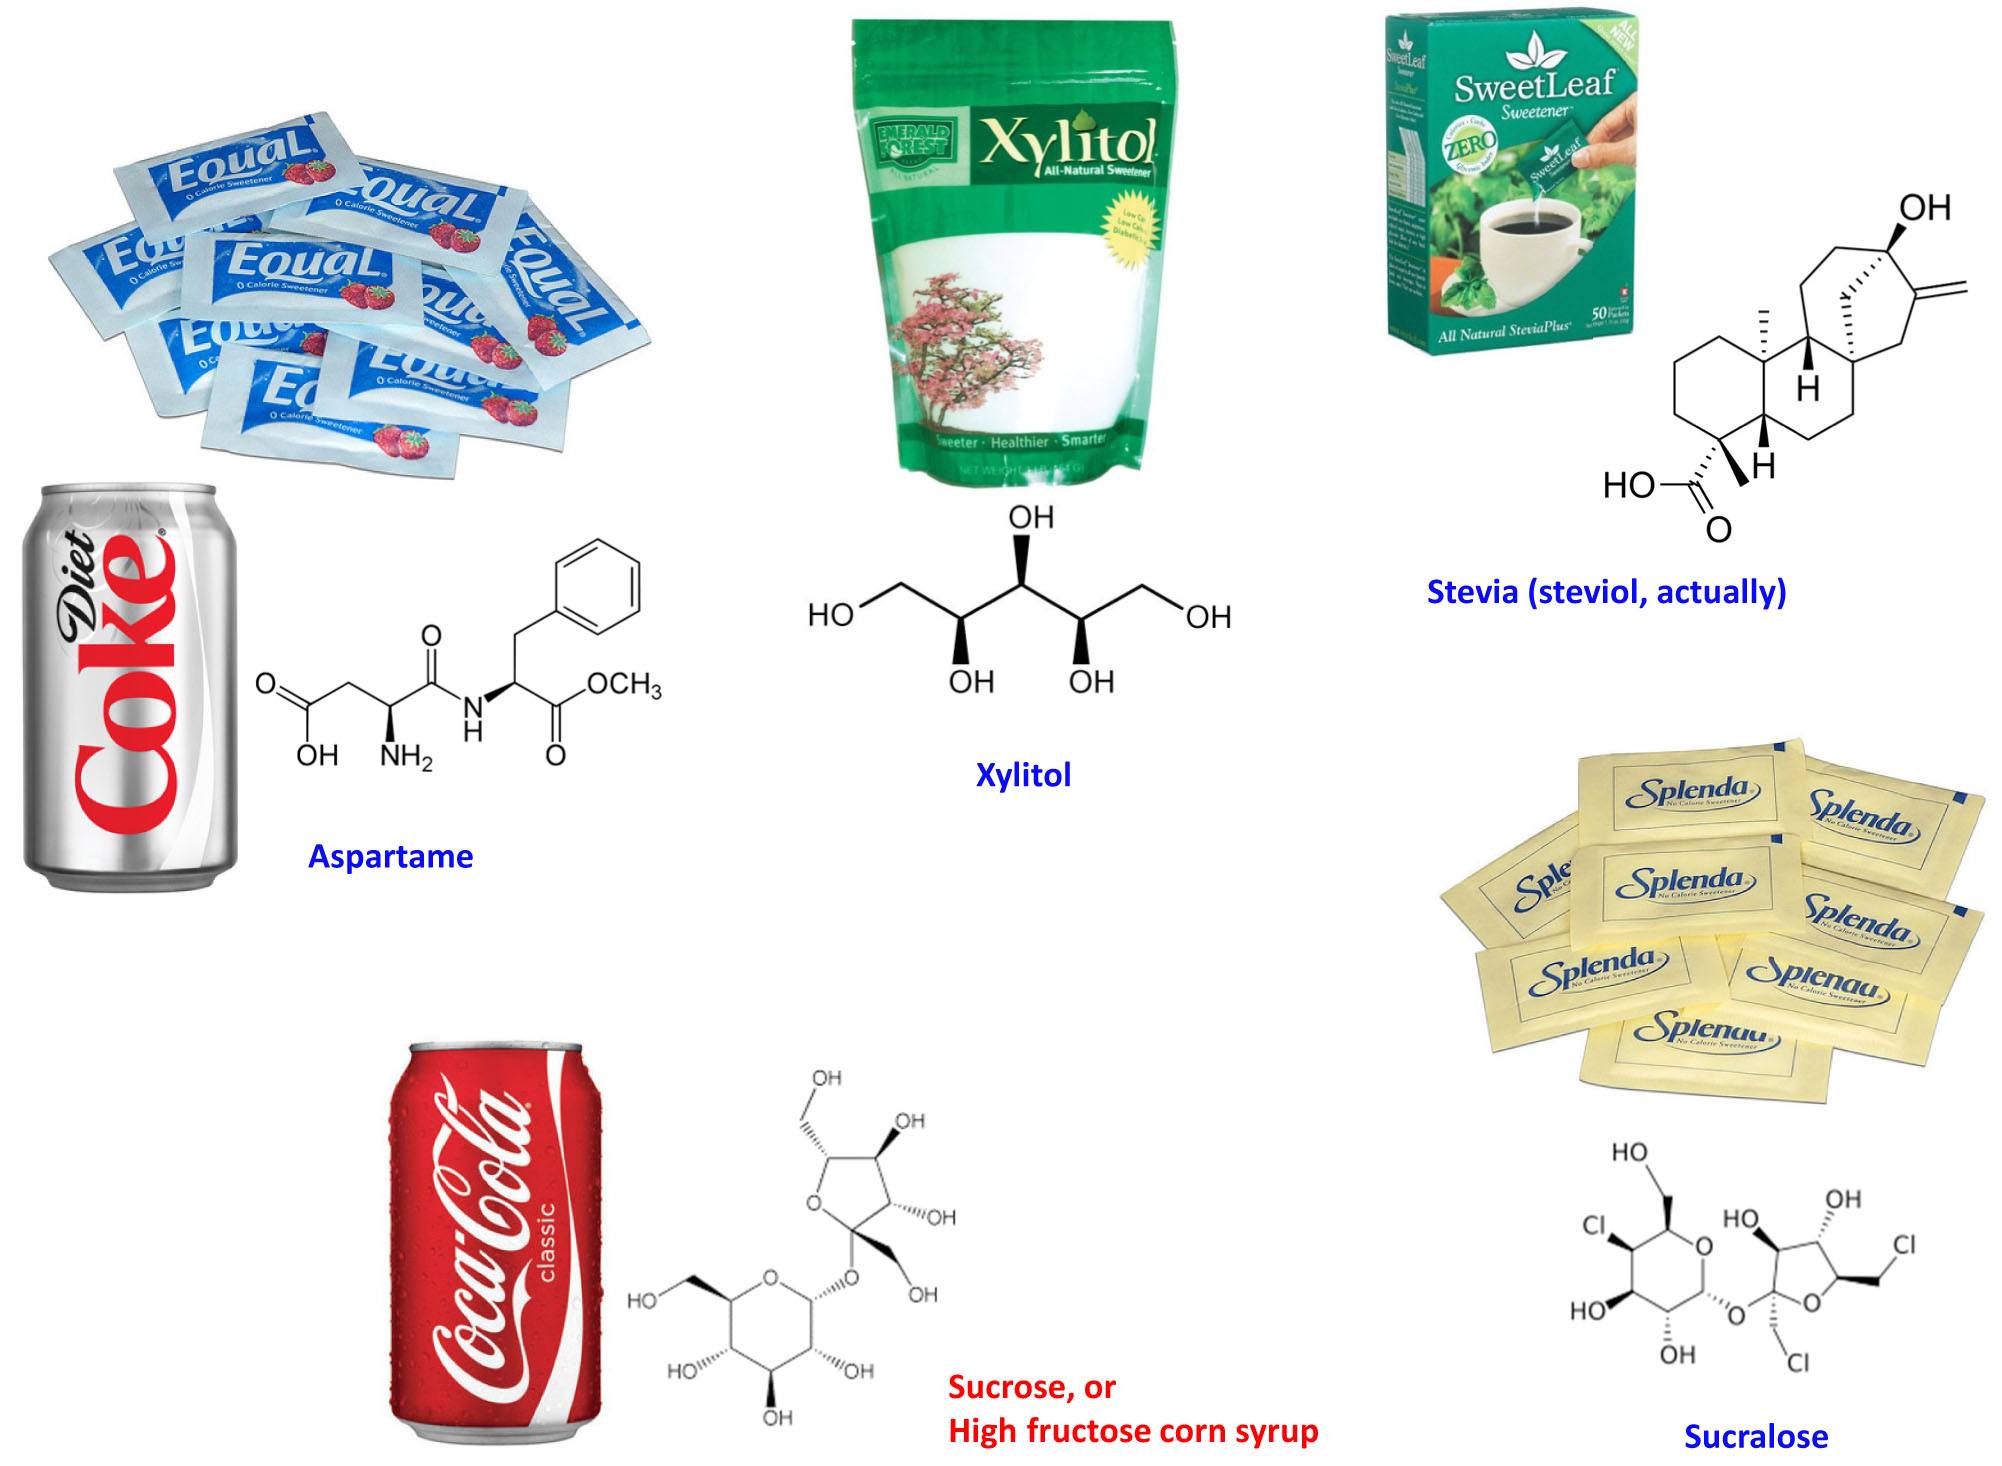 Sugar substitutes with molecular structures